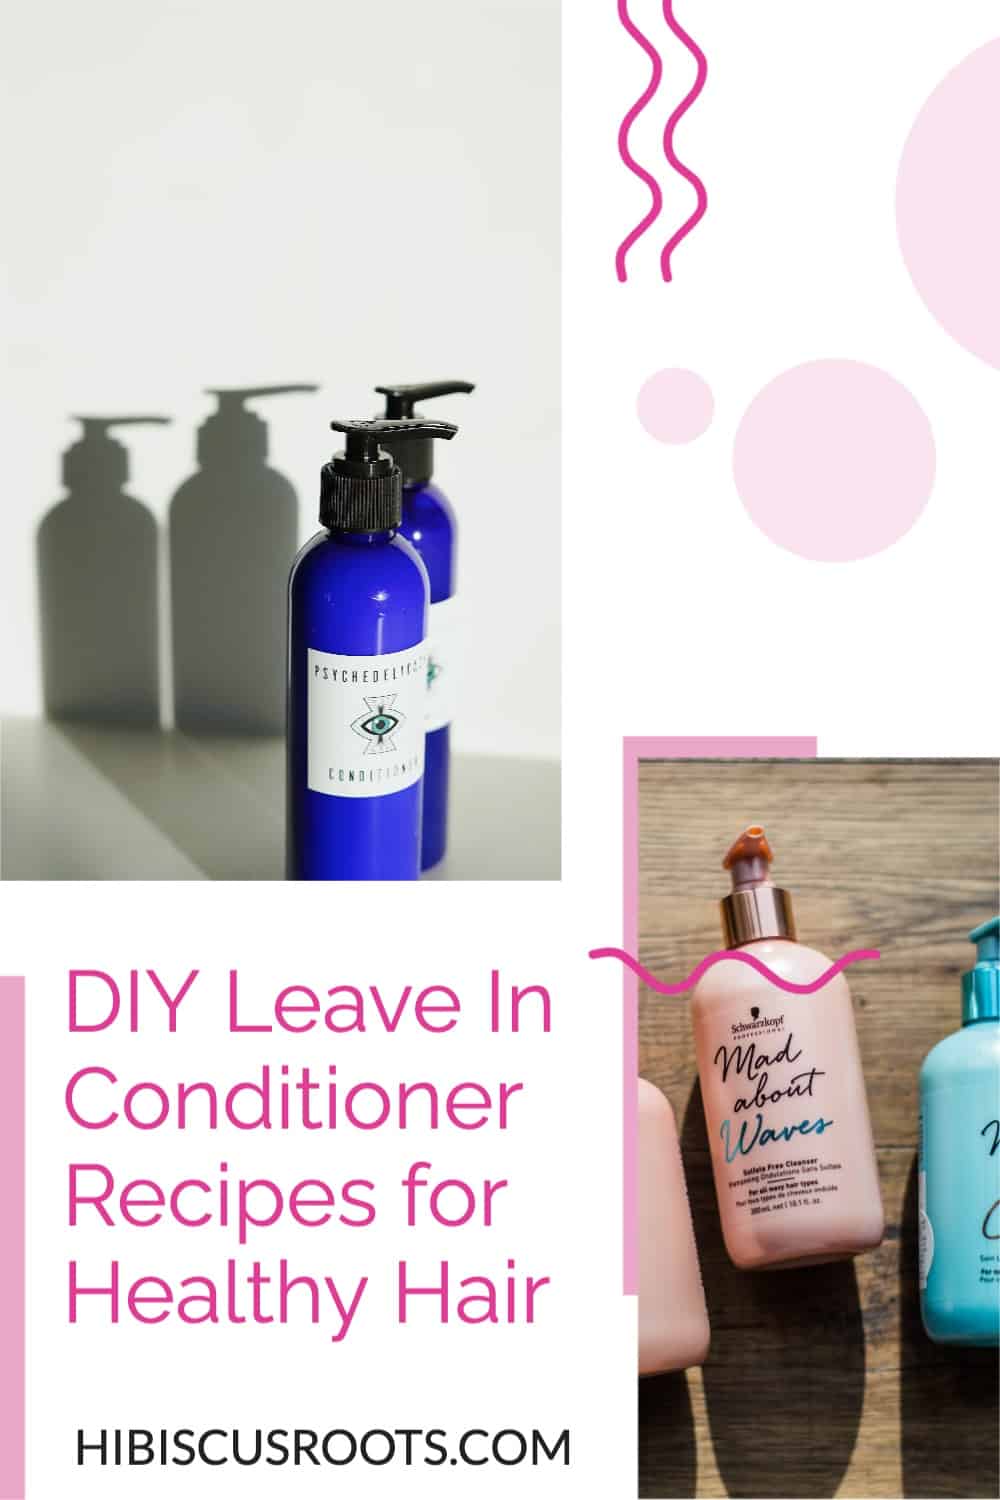 8 Leave-In Conditioner DIY Recipes for Healthy & Shiny Hair!